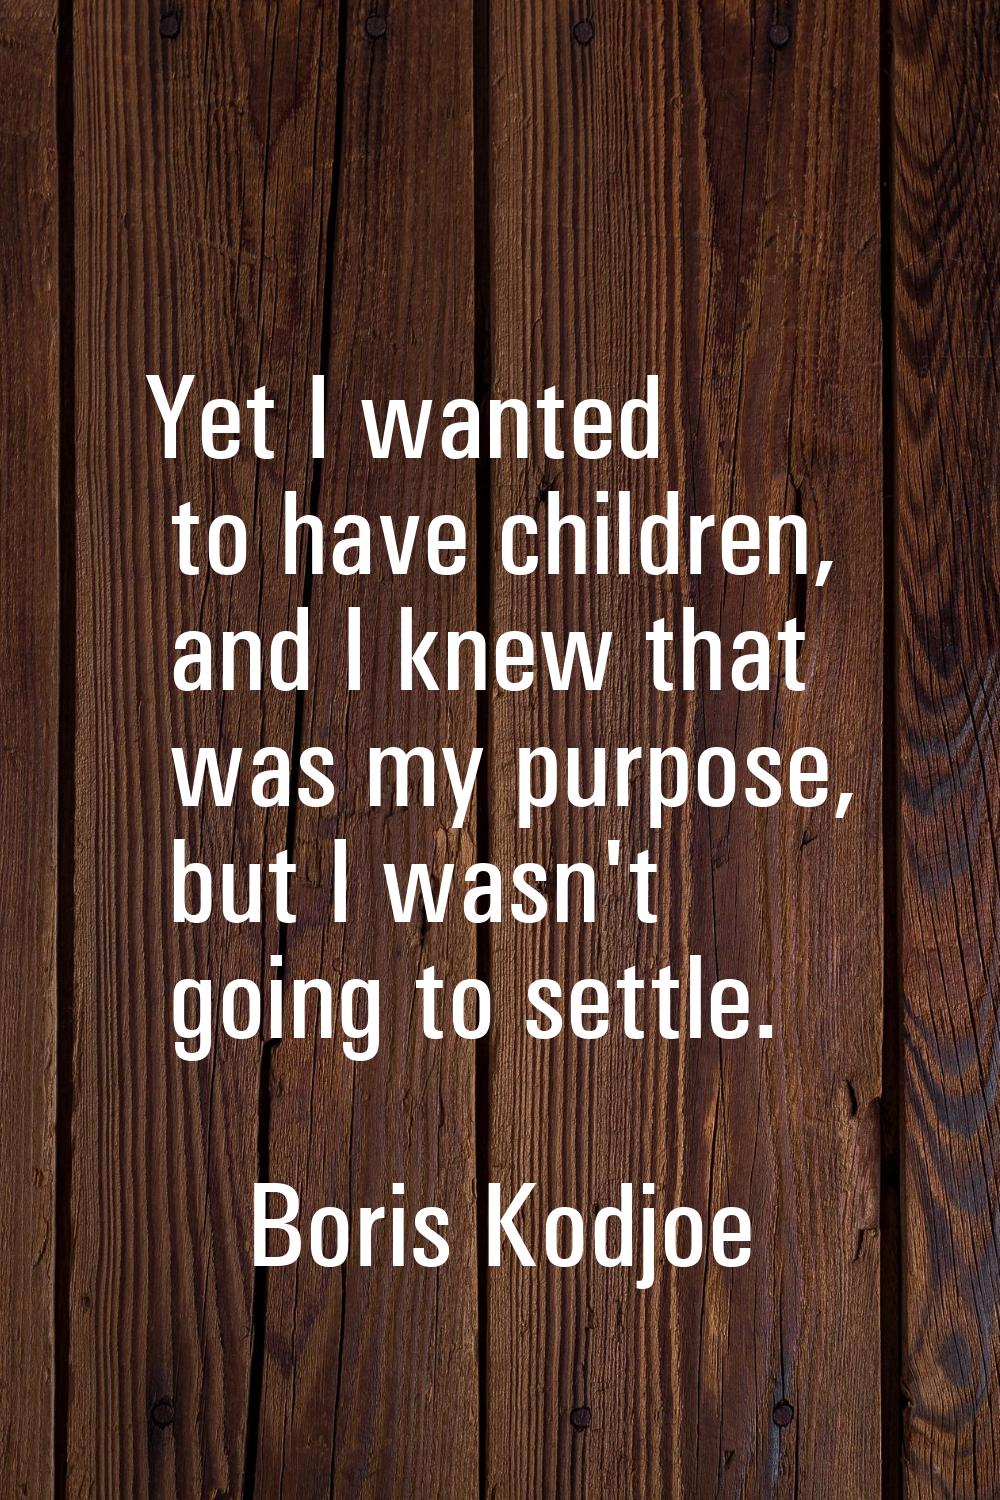 Yet I wanted to have children, and I knew that was my purpose, but I wasn't going to settle.